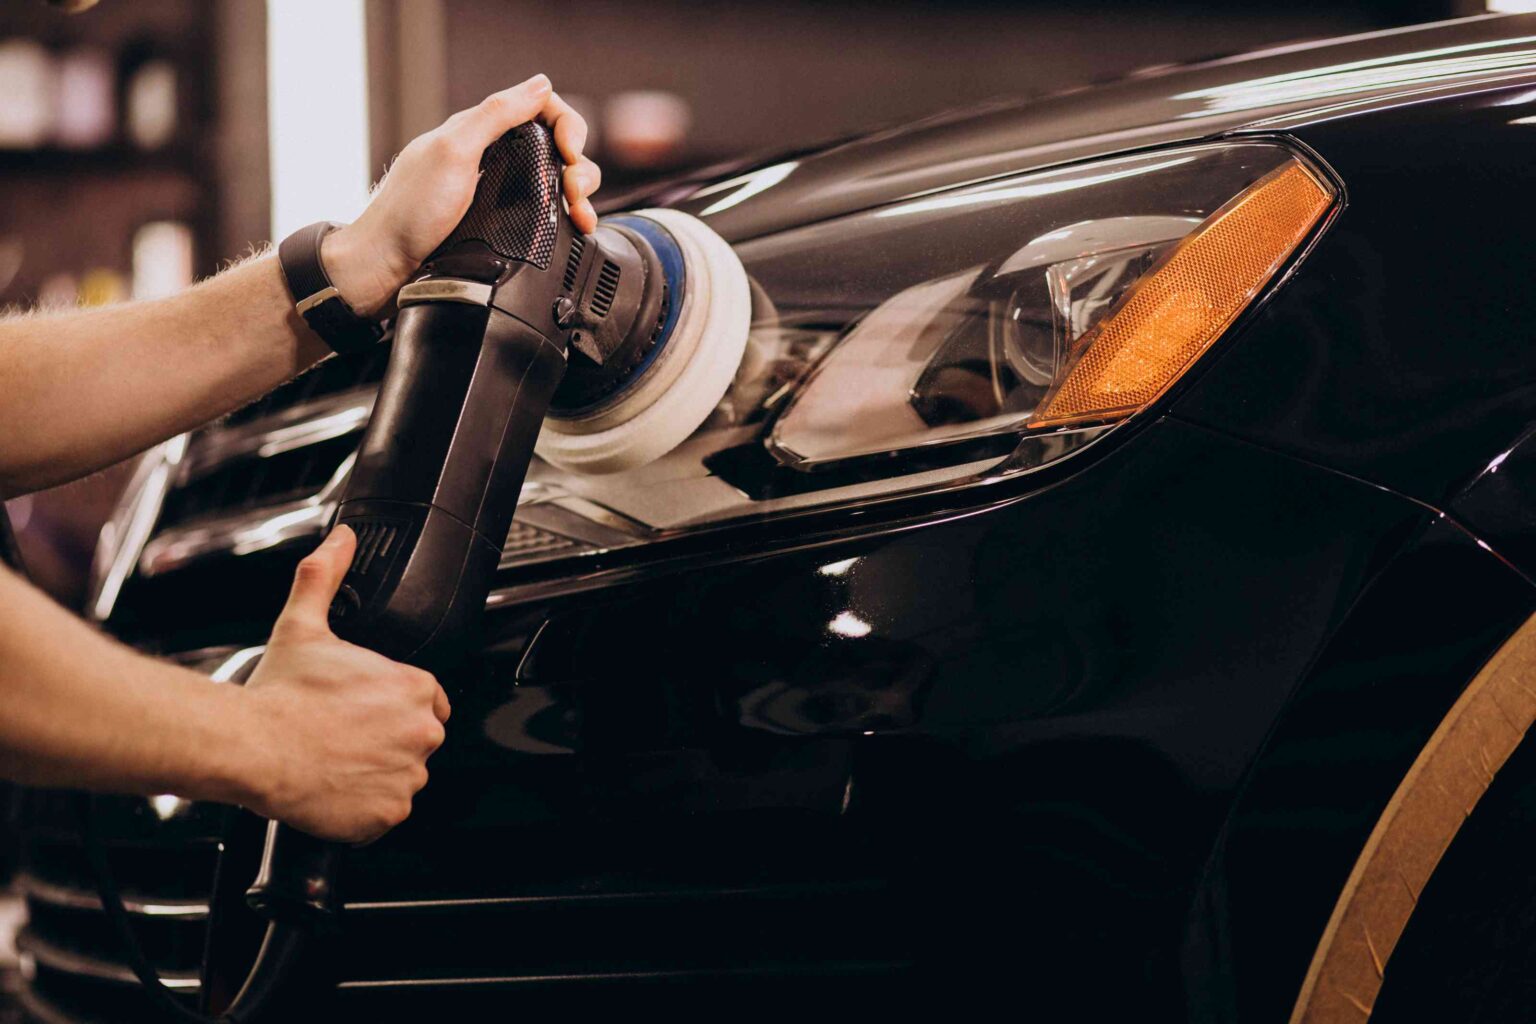 Top Tips For Choosing The Best Car Detailing And Polishing Products